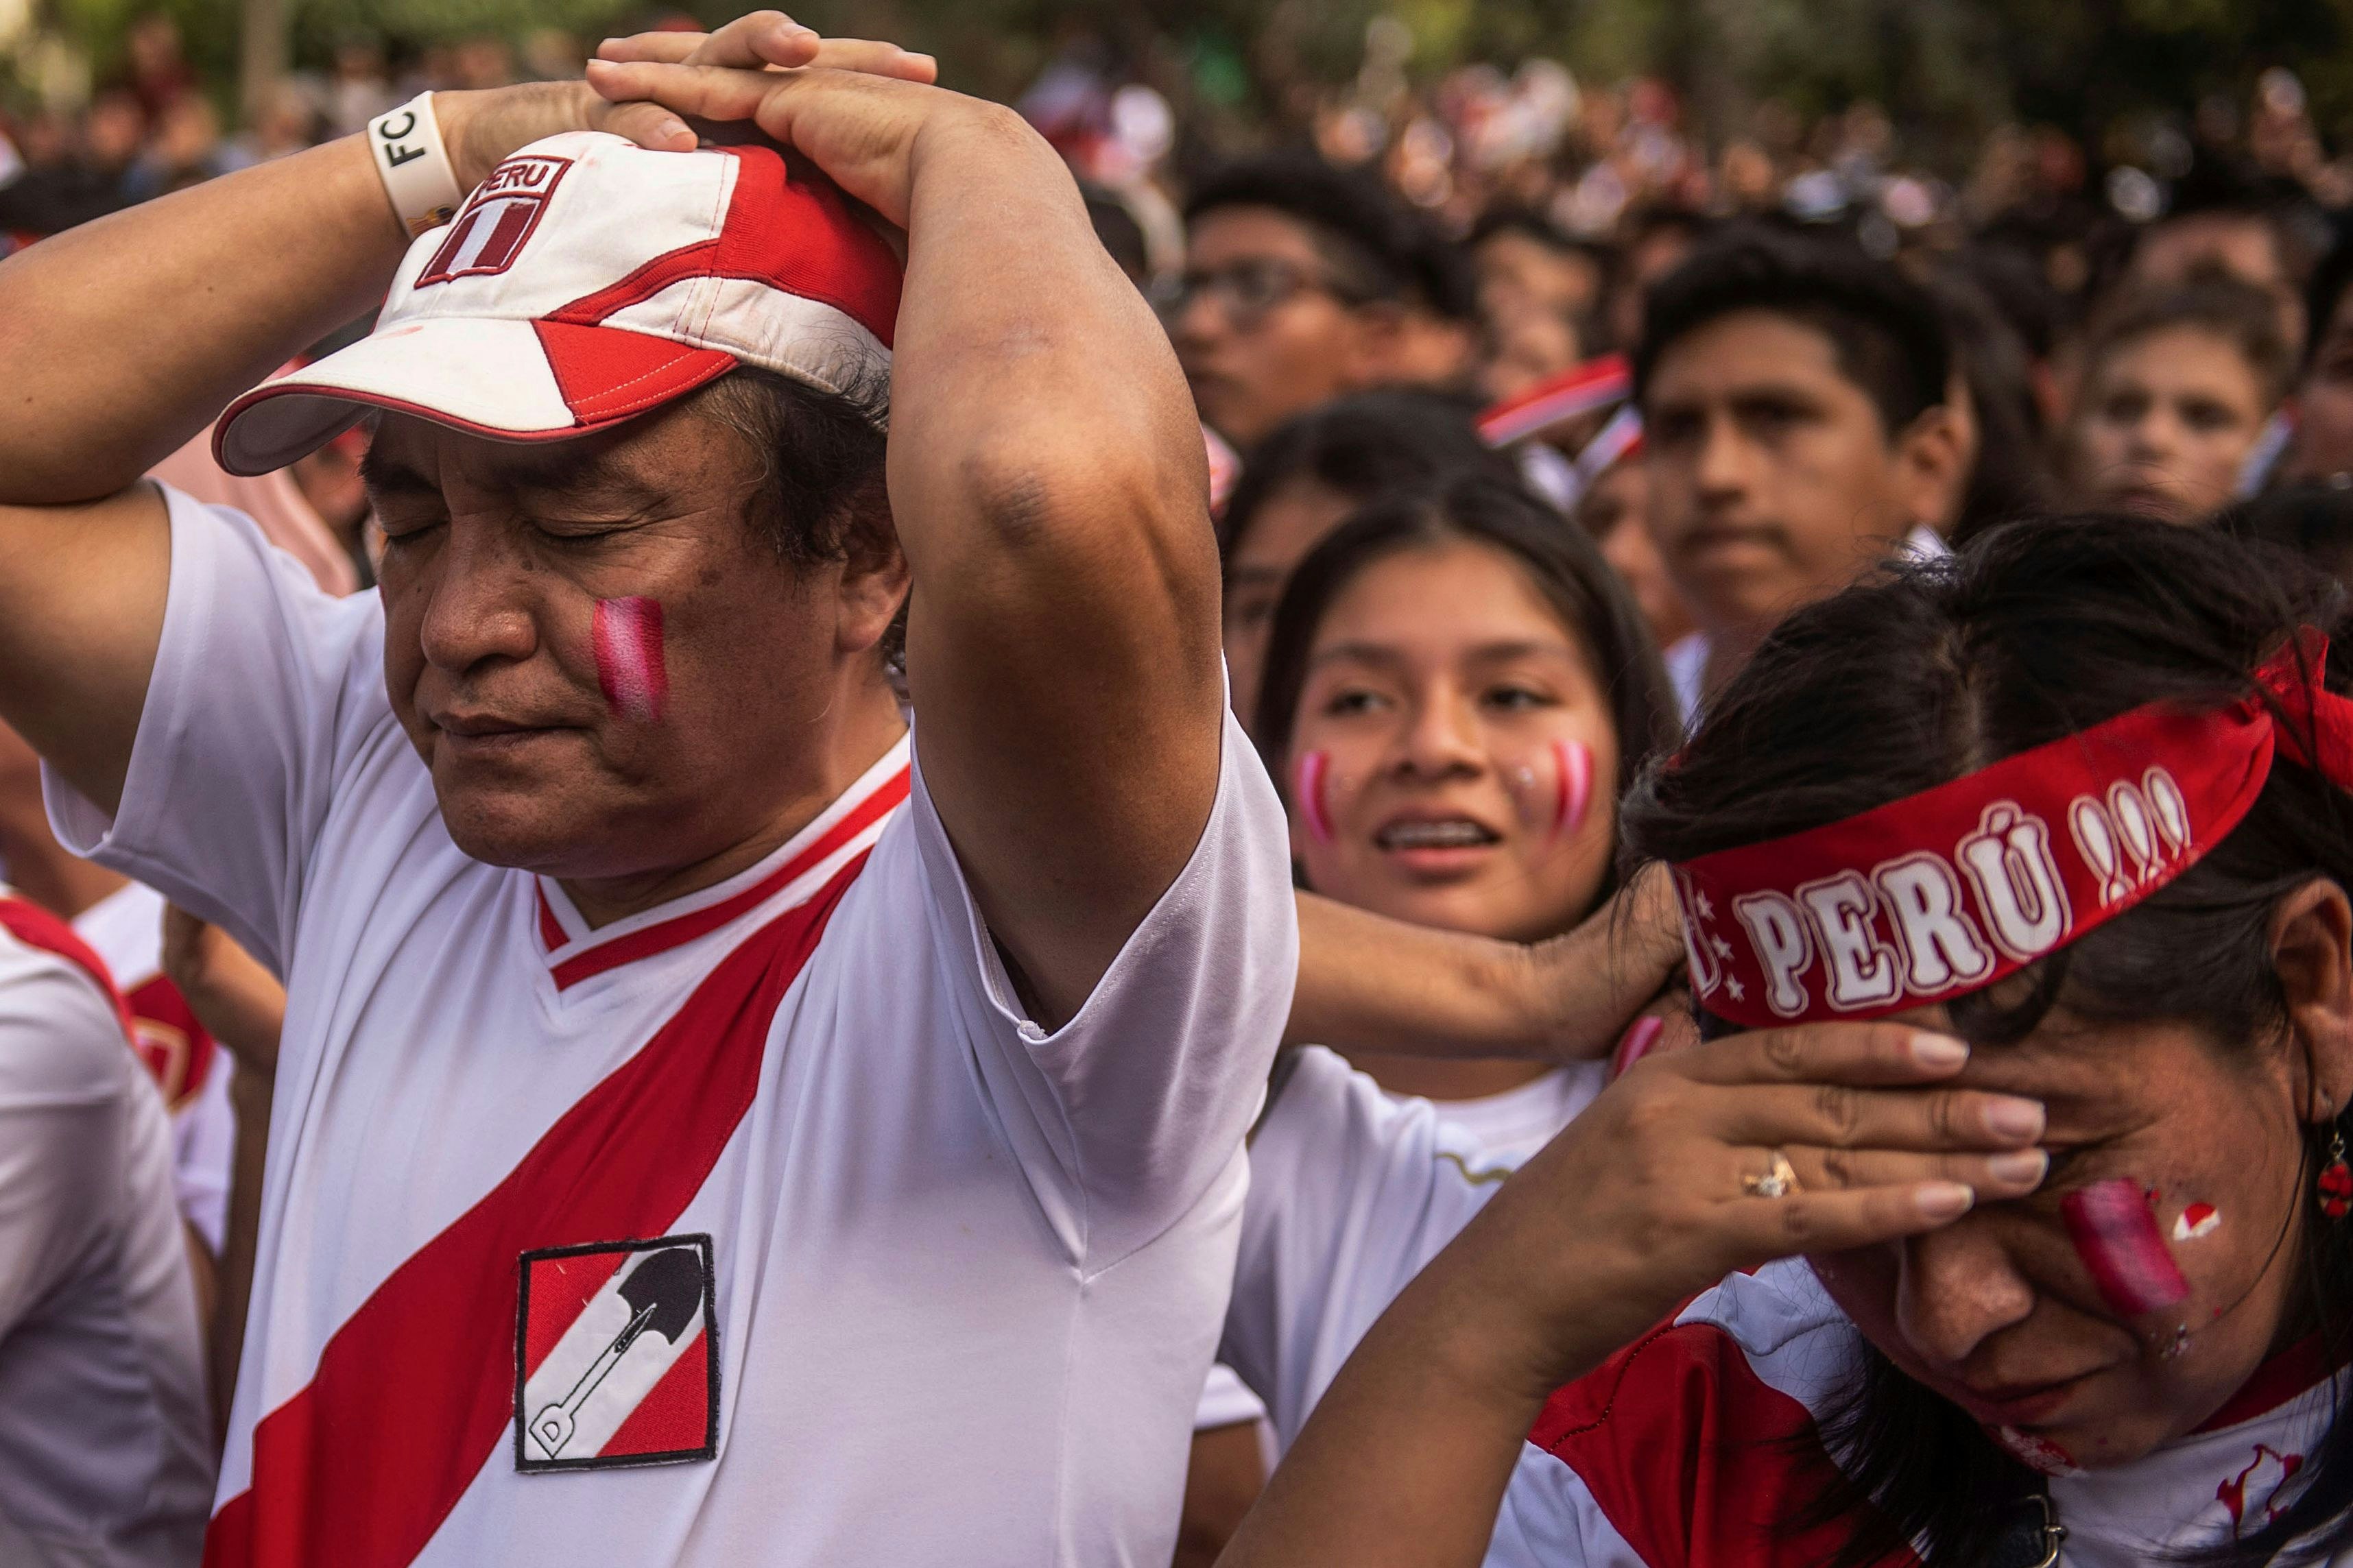 A man with his hands resting on the top of his head with his eyes close stands next to a woman wearing a "Peru" headband who has her hand resting on her forehead. They are surrounded by a large group of sad Peru fans after a soccer loss. 